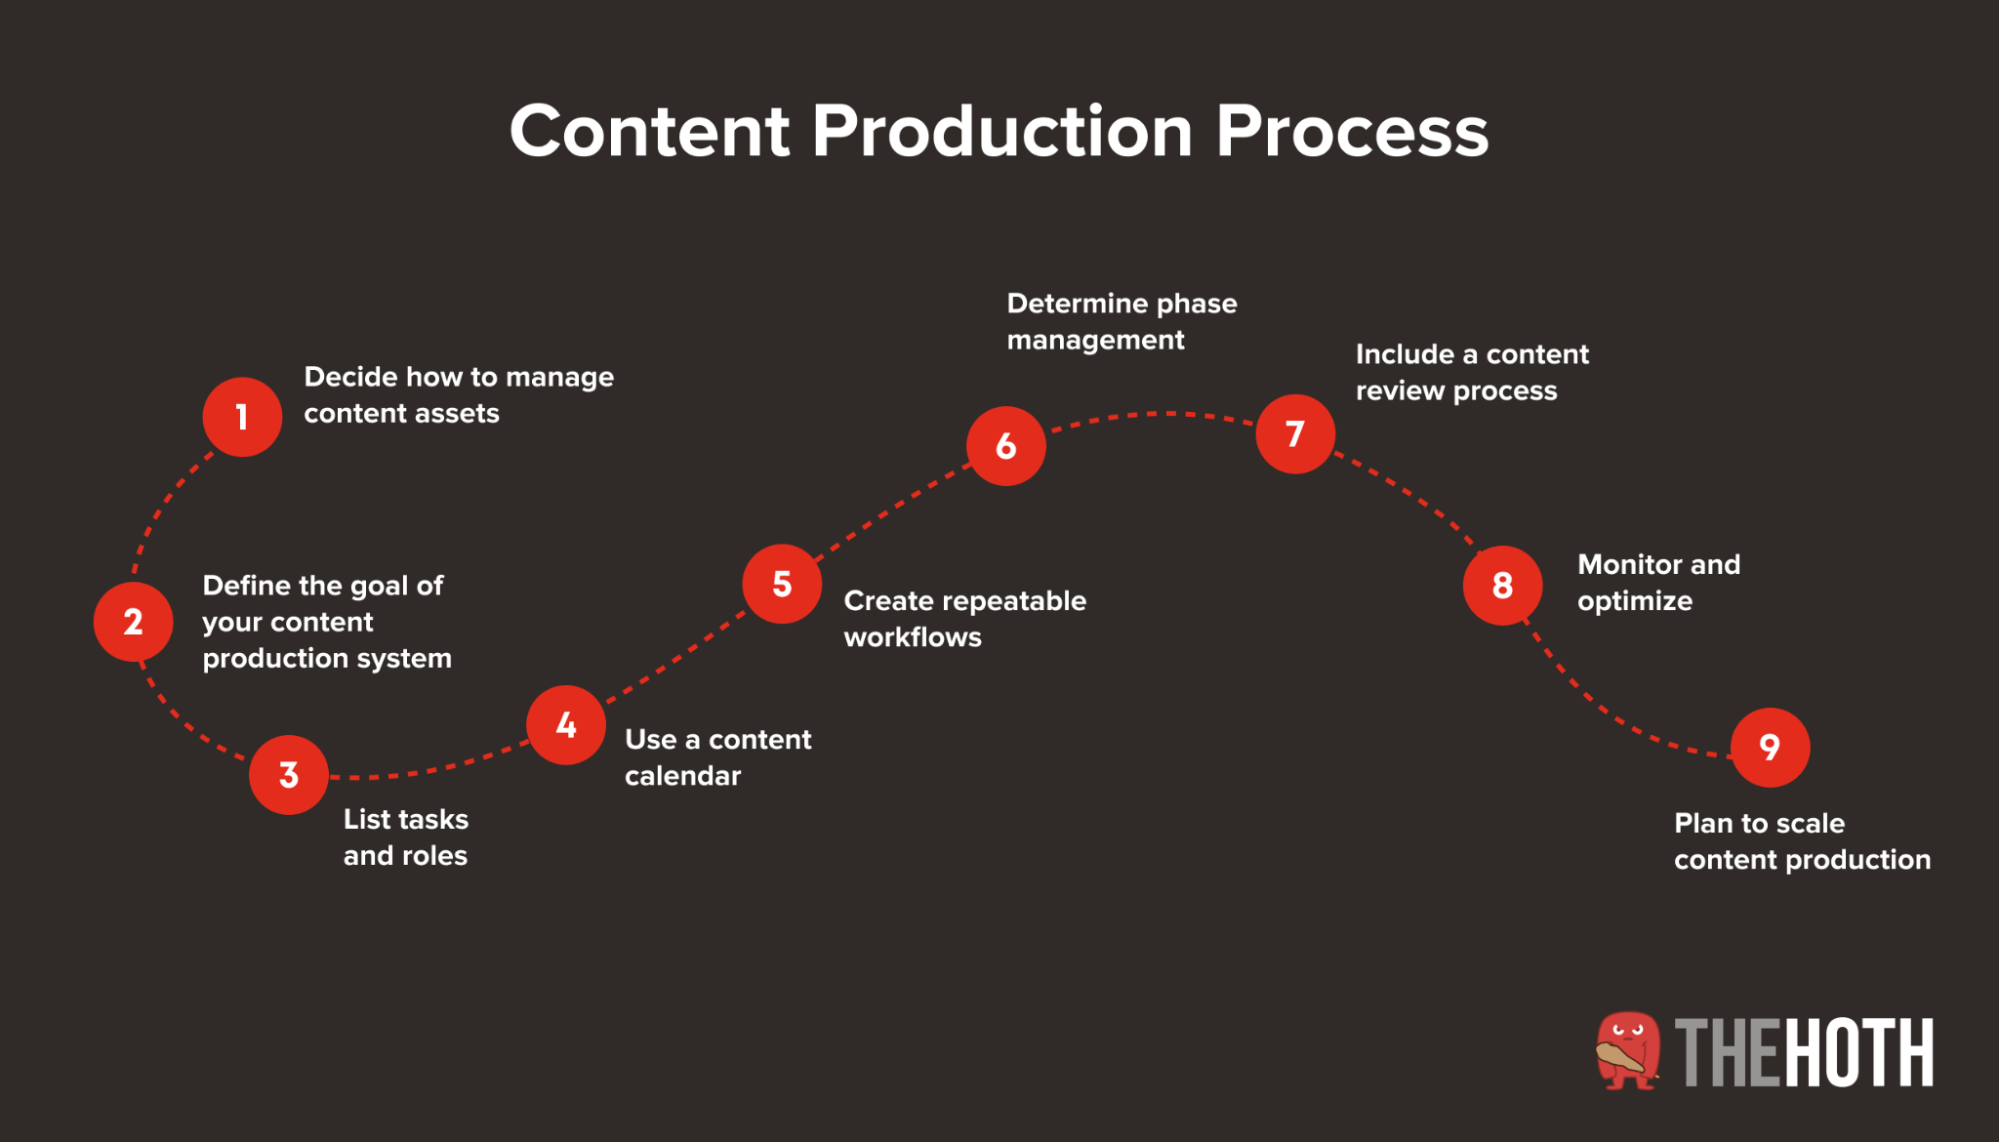 Steps to creating an effective content production process